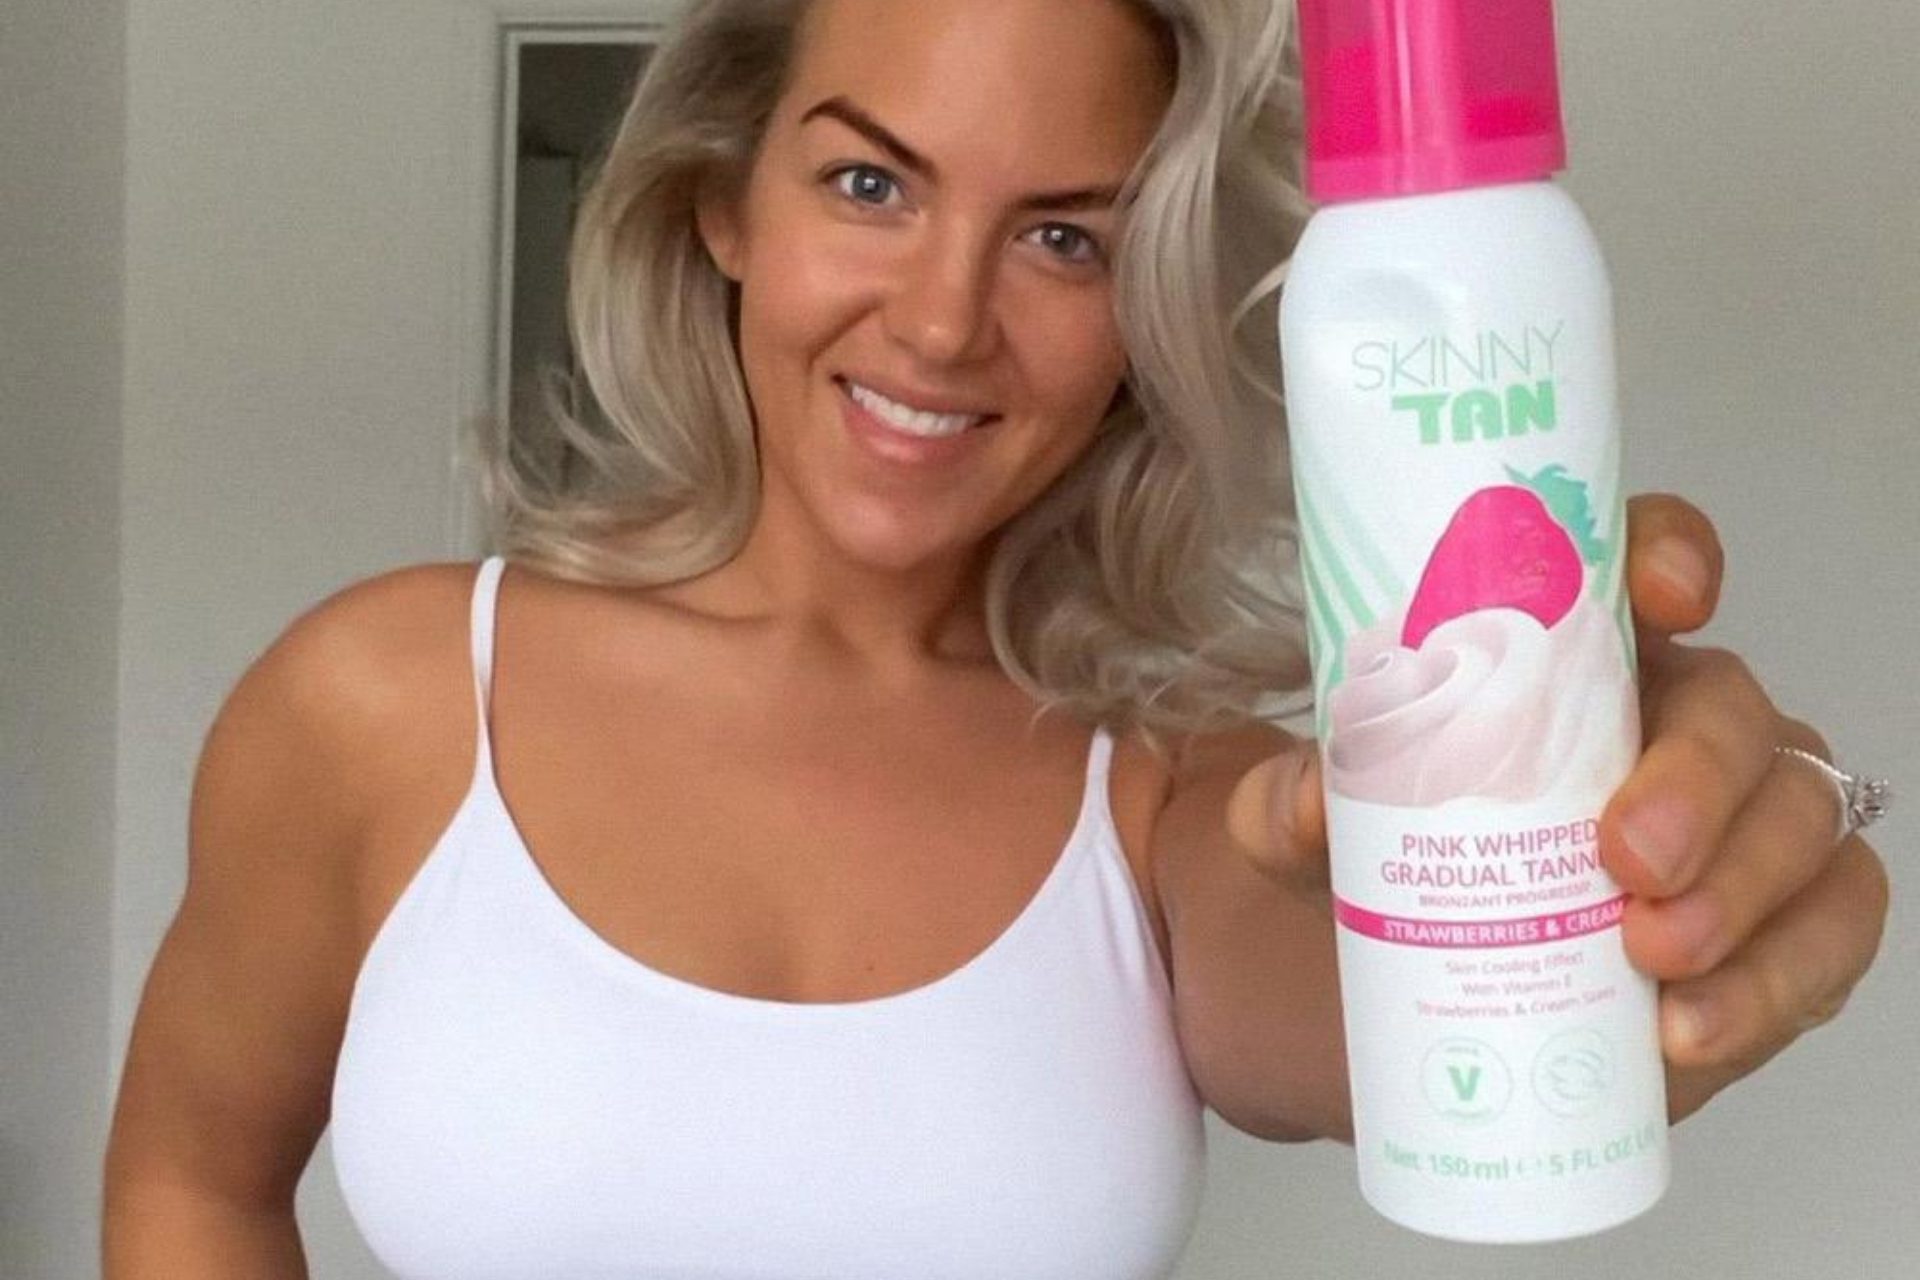 Meet the Limited Edition Booby Bottle by Skinny Tan - CoppaFeel!